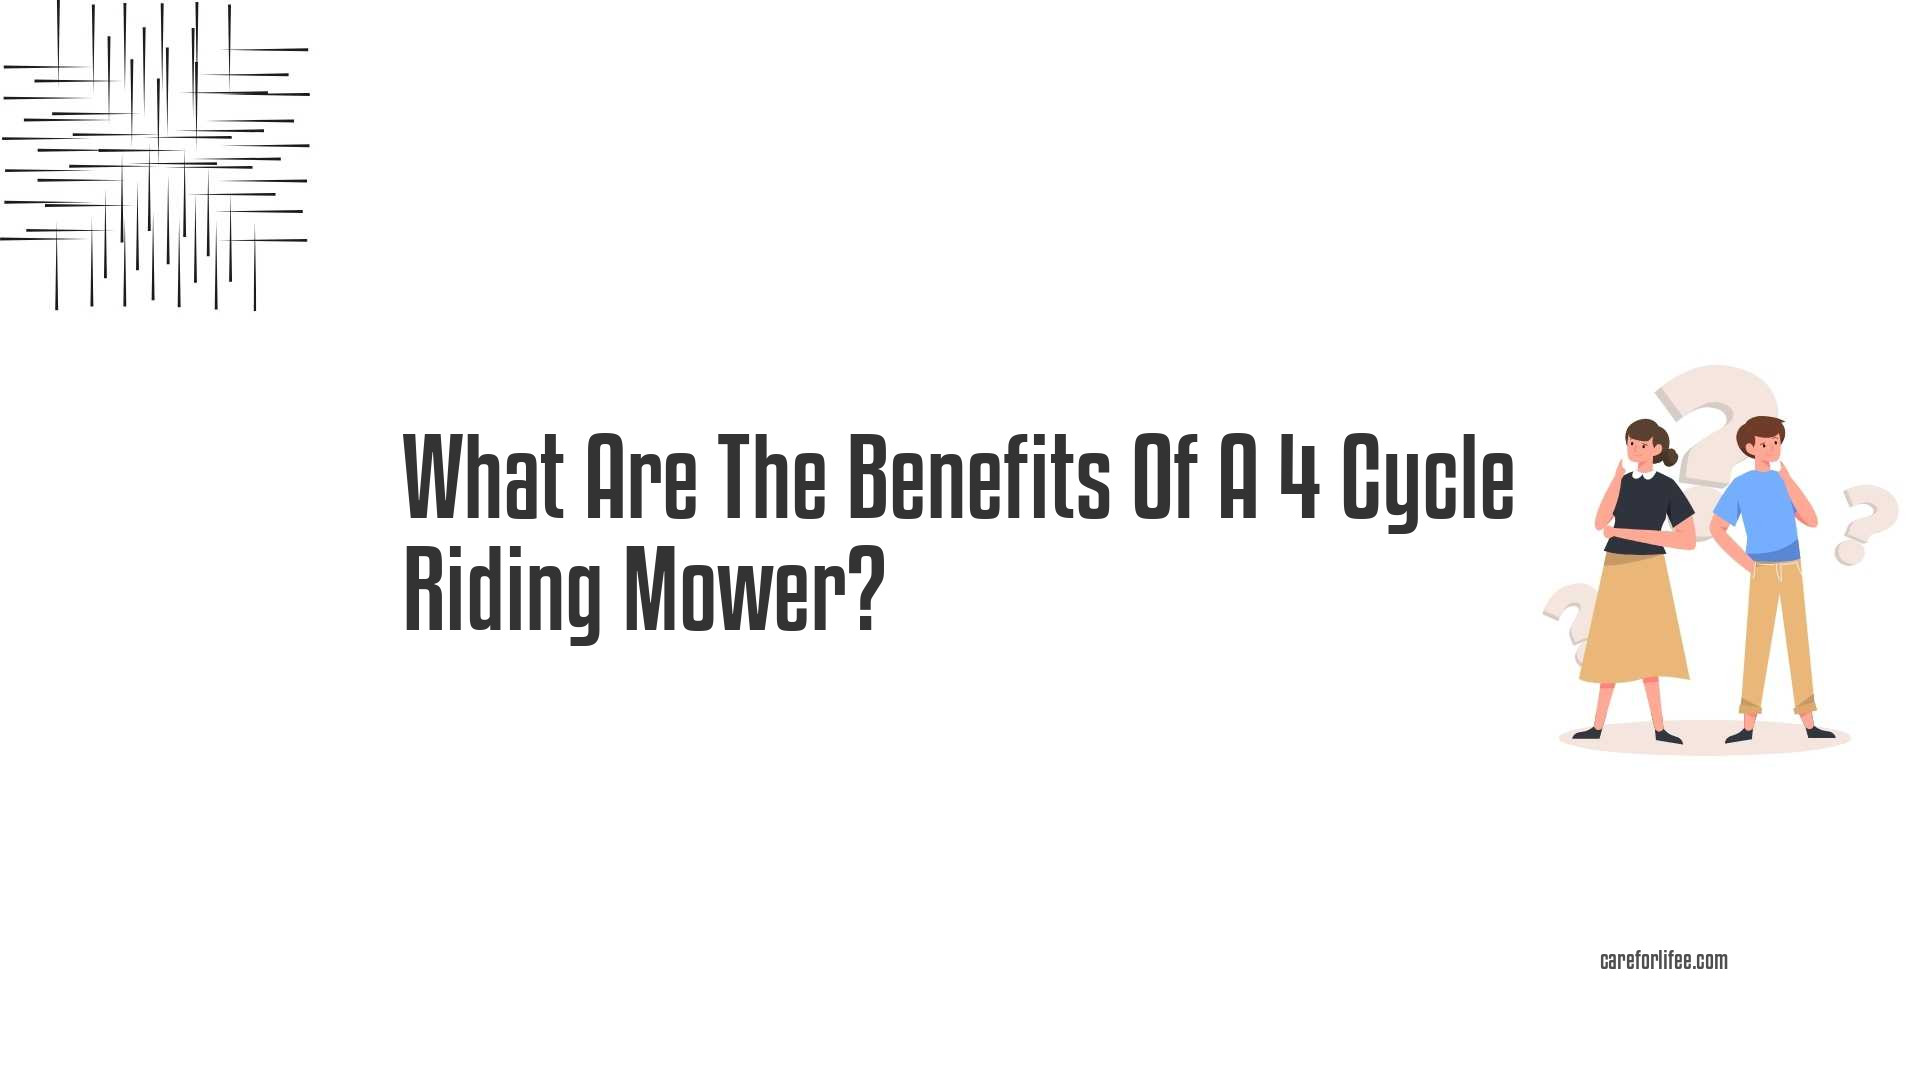 What Are The Benefits Of A 4 Cycle Riding Mower?